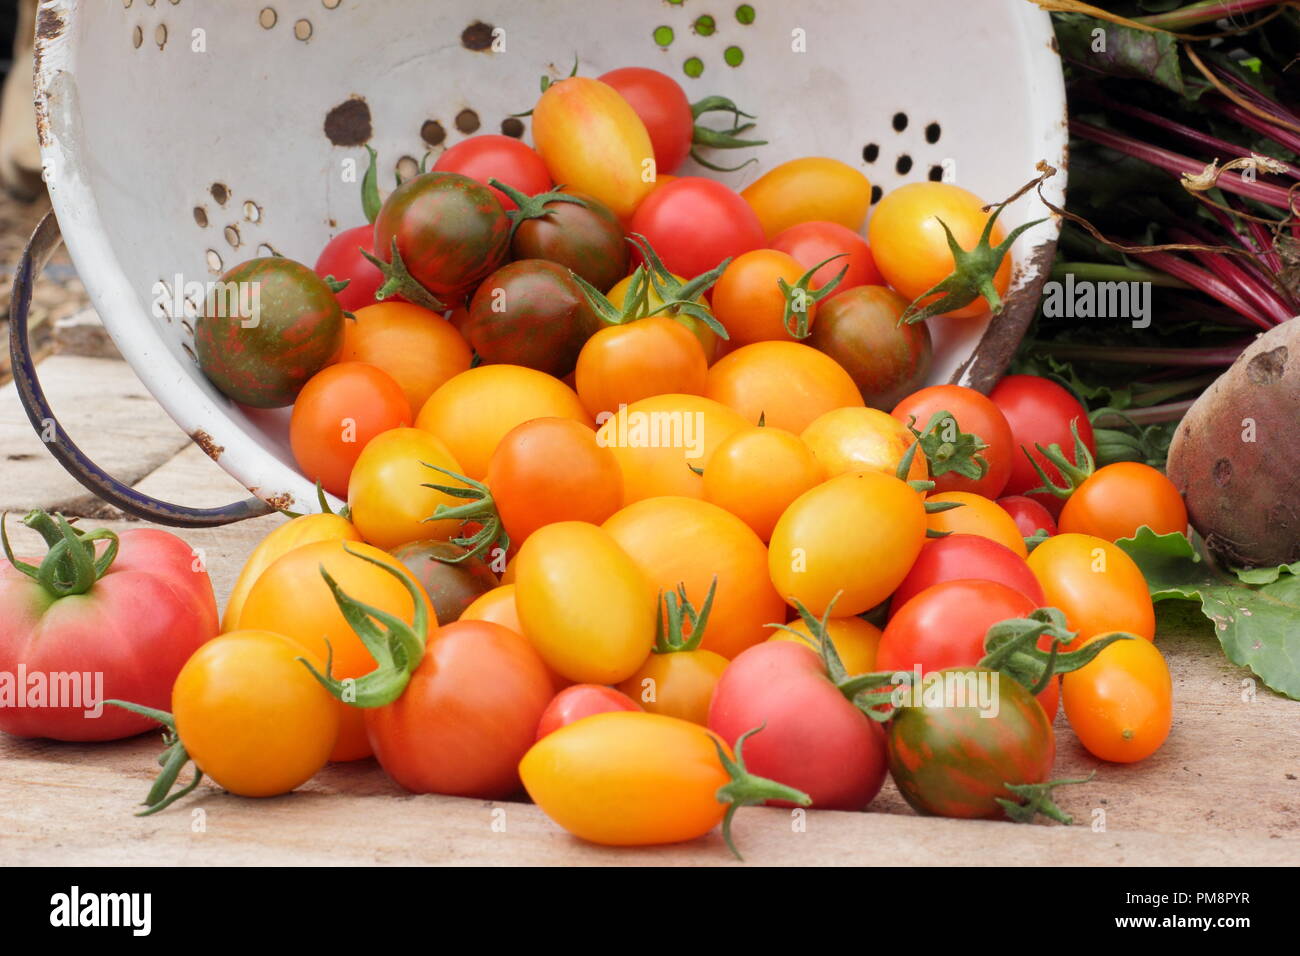 Tomatoes in colander. Freshly picked homegrown tomatoes (Solanum lycopersicum -  Chadwick's Cherry and Black Zebra in enamel colander,UK Stock Photo